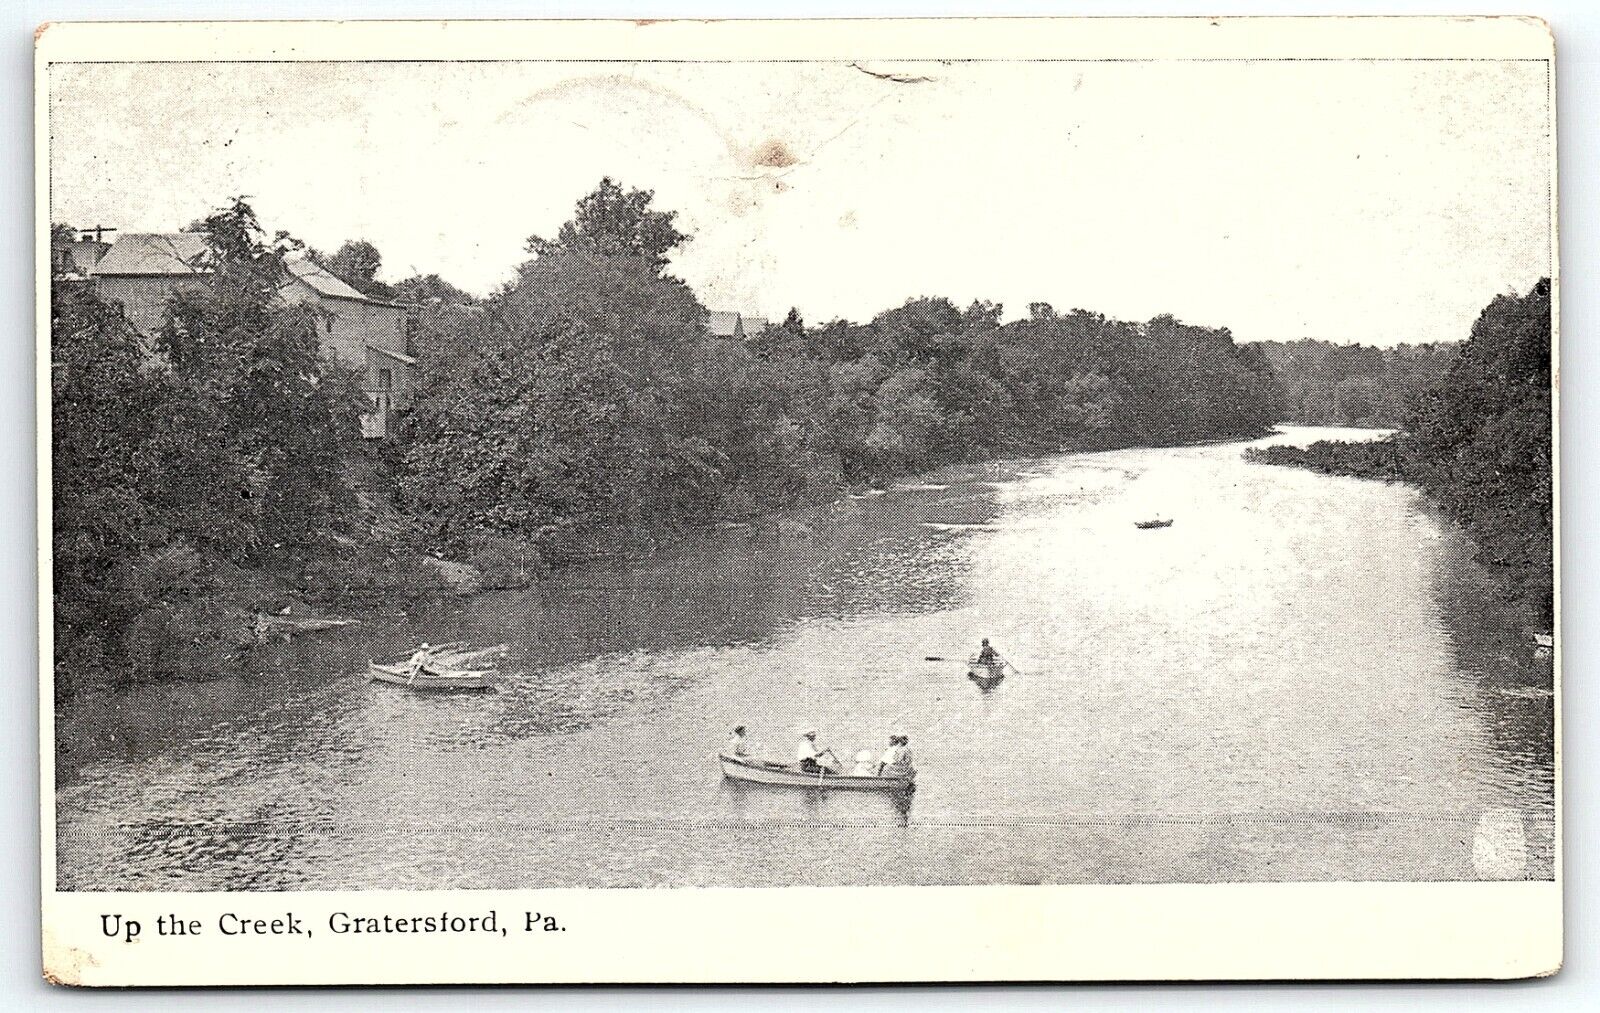 1915 GRATERSFORD PA UP THE CREEK PEOPLE ENJOYING TIME IN CANOES POSTCARD P4101